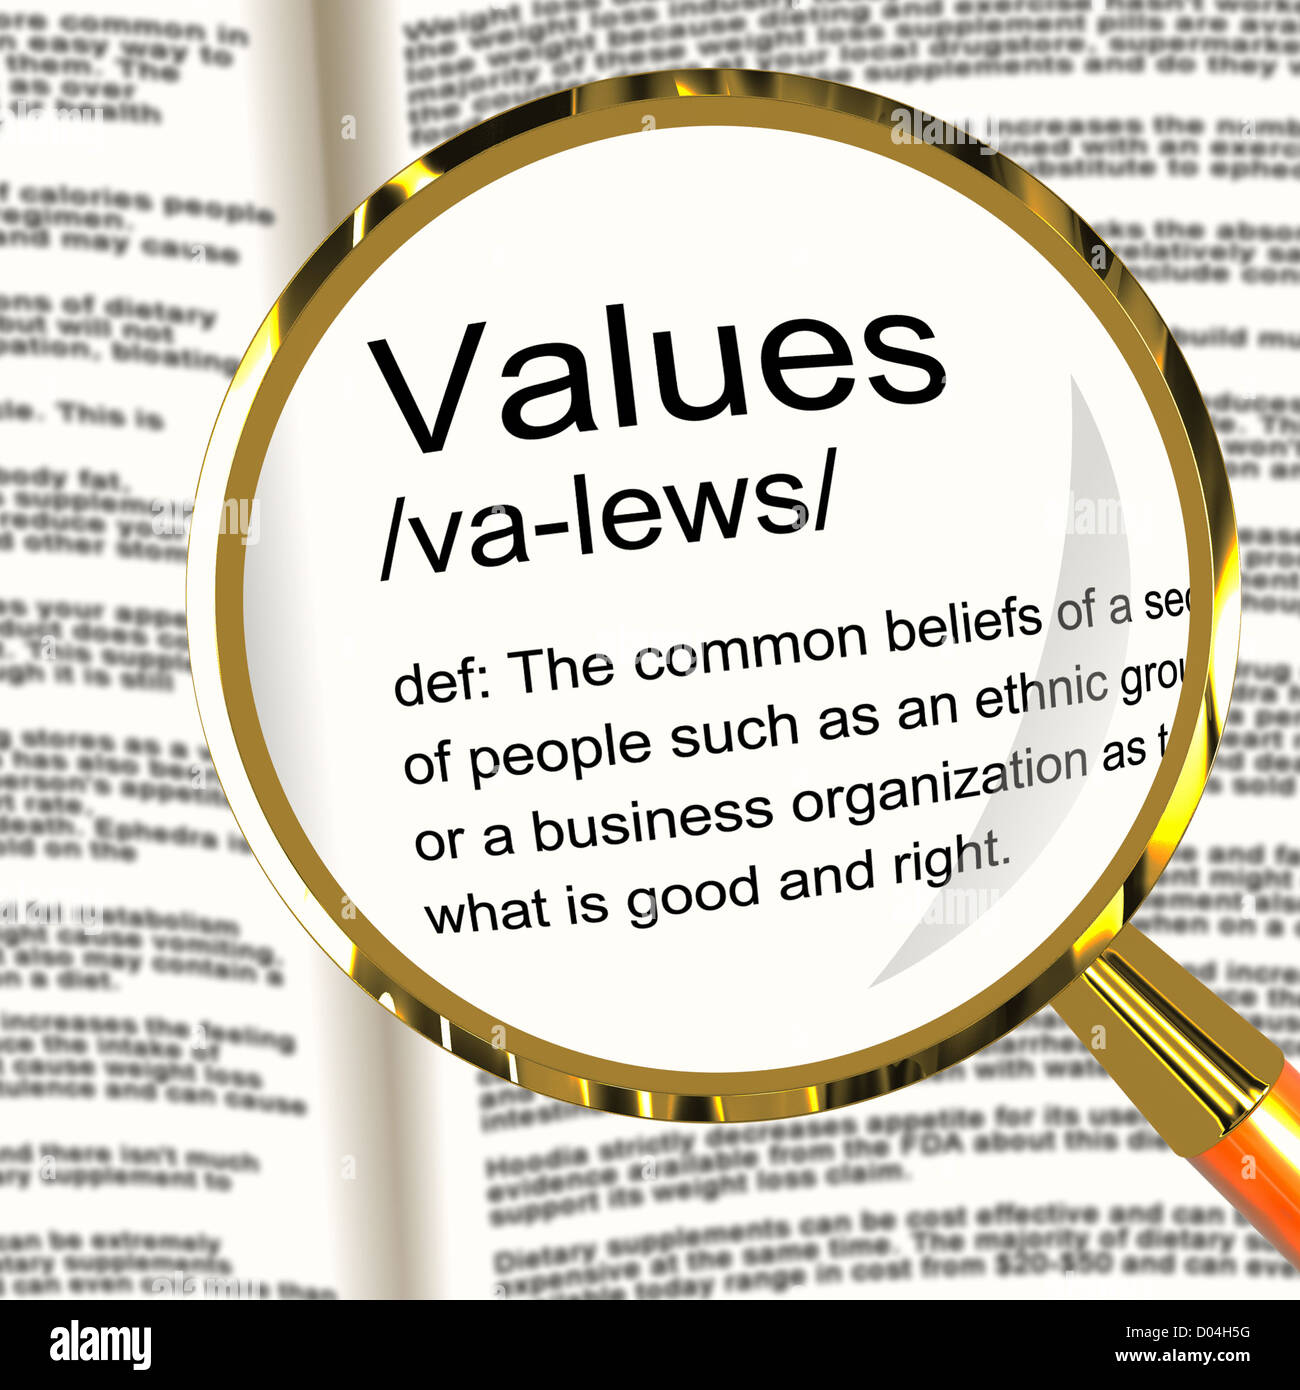 Value definition. Reliability Testing. Ethics Definition.